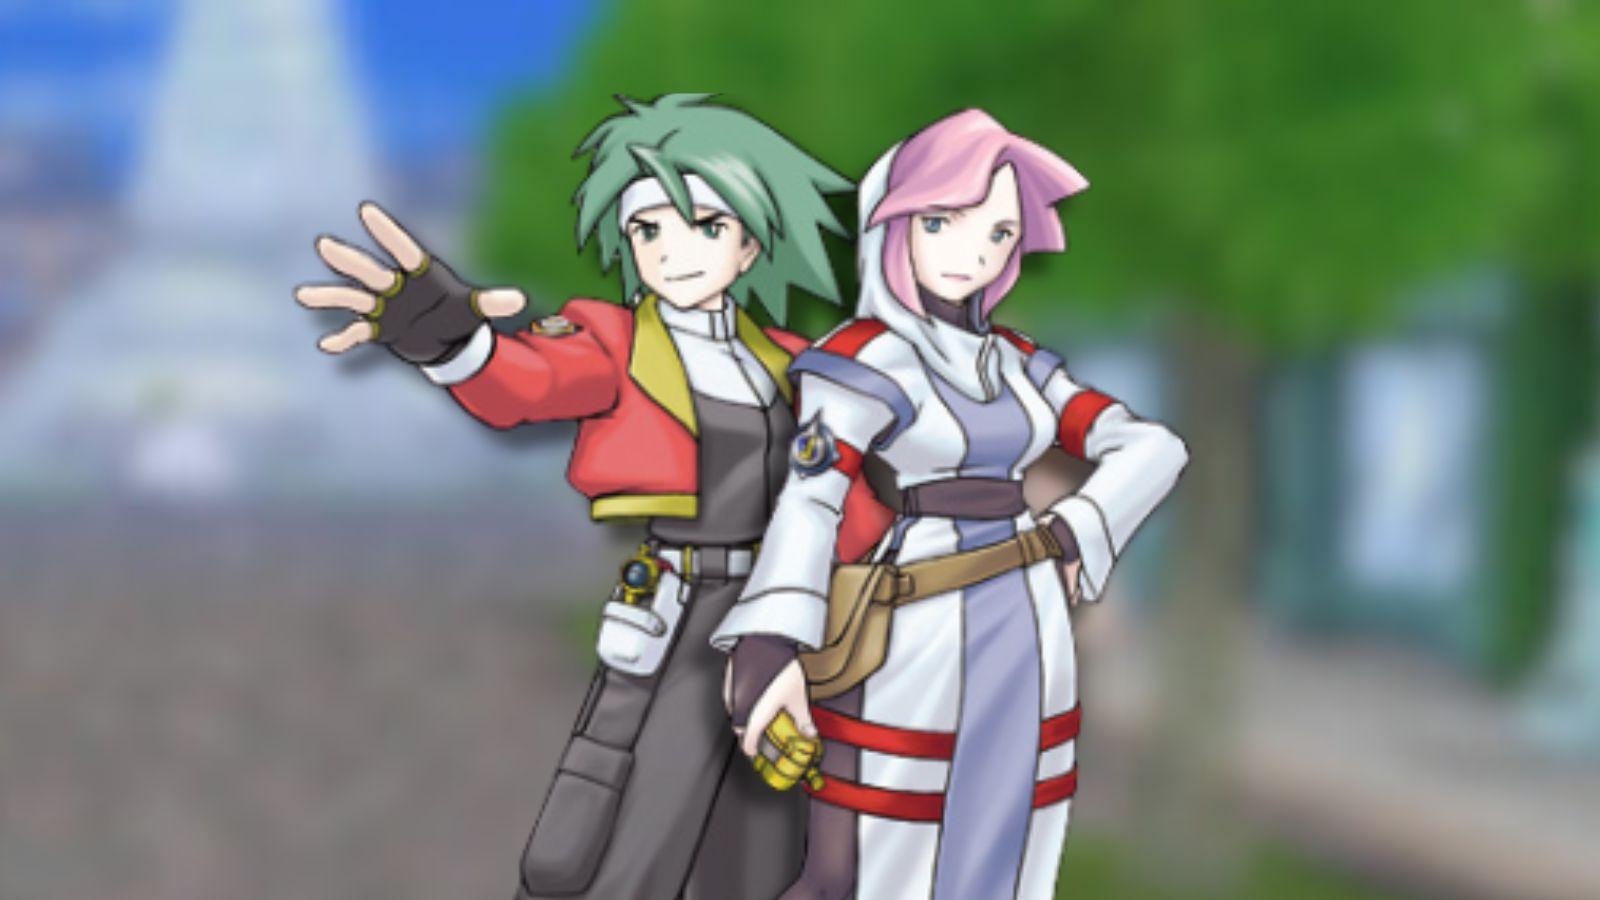 Characters from Pokemon Ranger with Pokemon X and Y background.